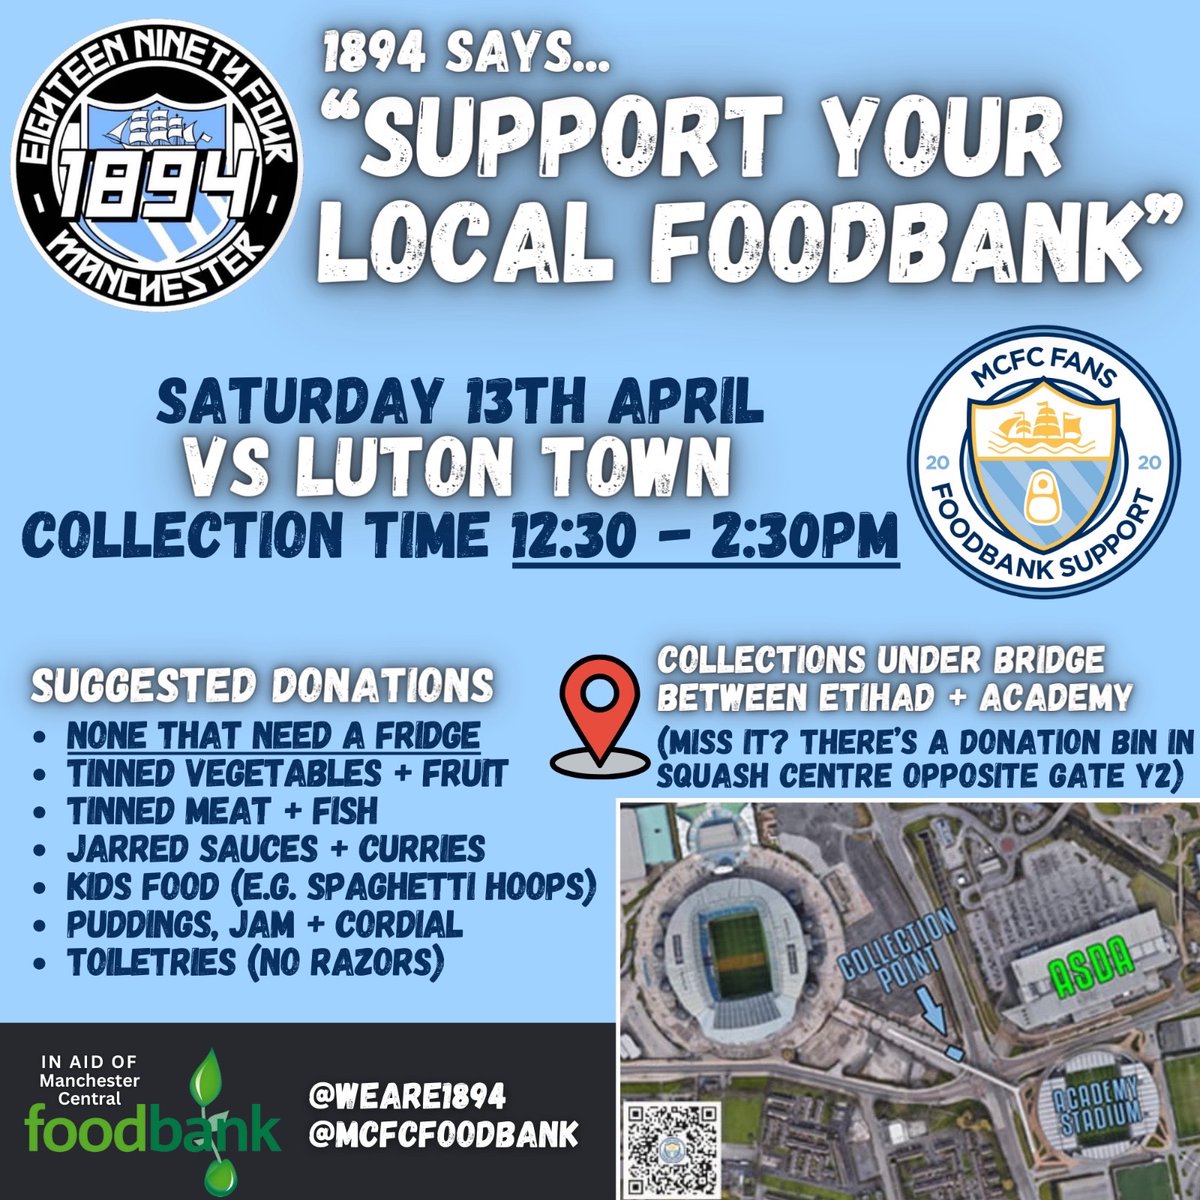 We wanted to say a big thanks to @MCFCfoodbank for sticking up for City fans & speaking out on various issues. We’re asking fans to bring items on Saturday- Foodbank awareness day. Please spread the word people need their help all year round.